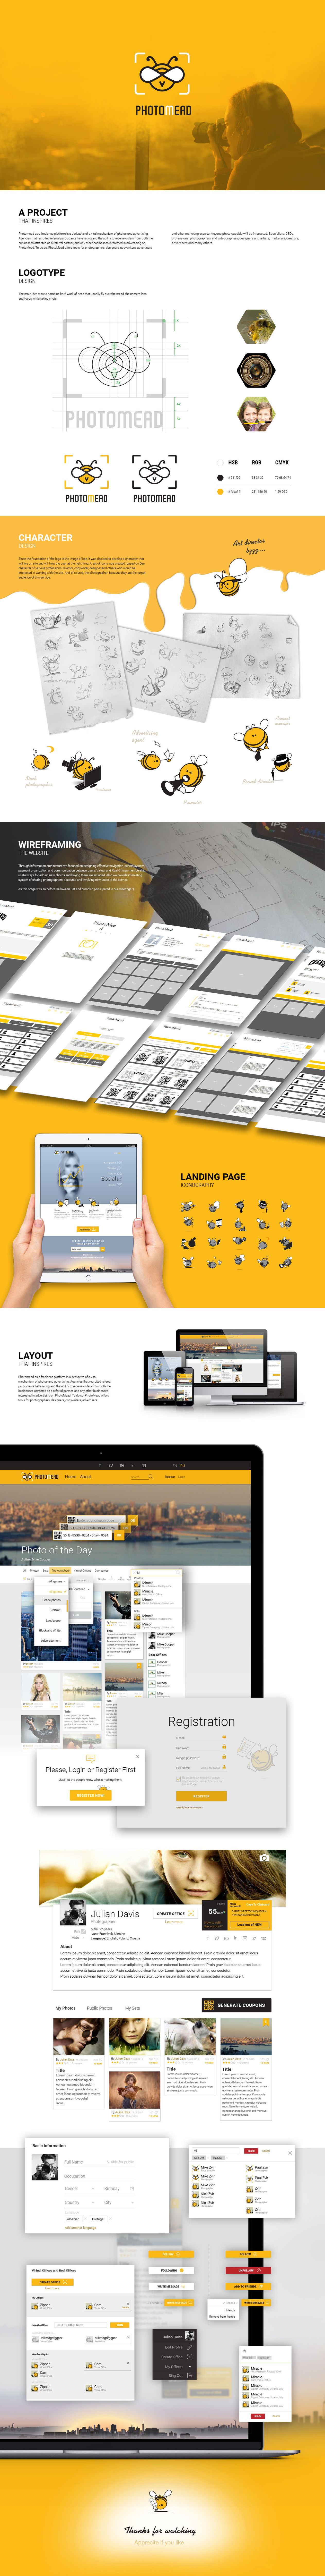 bee Logotype yellow site landing wireframes Project ux UI photographer Icon Layout Character flat design